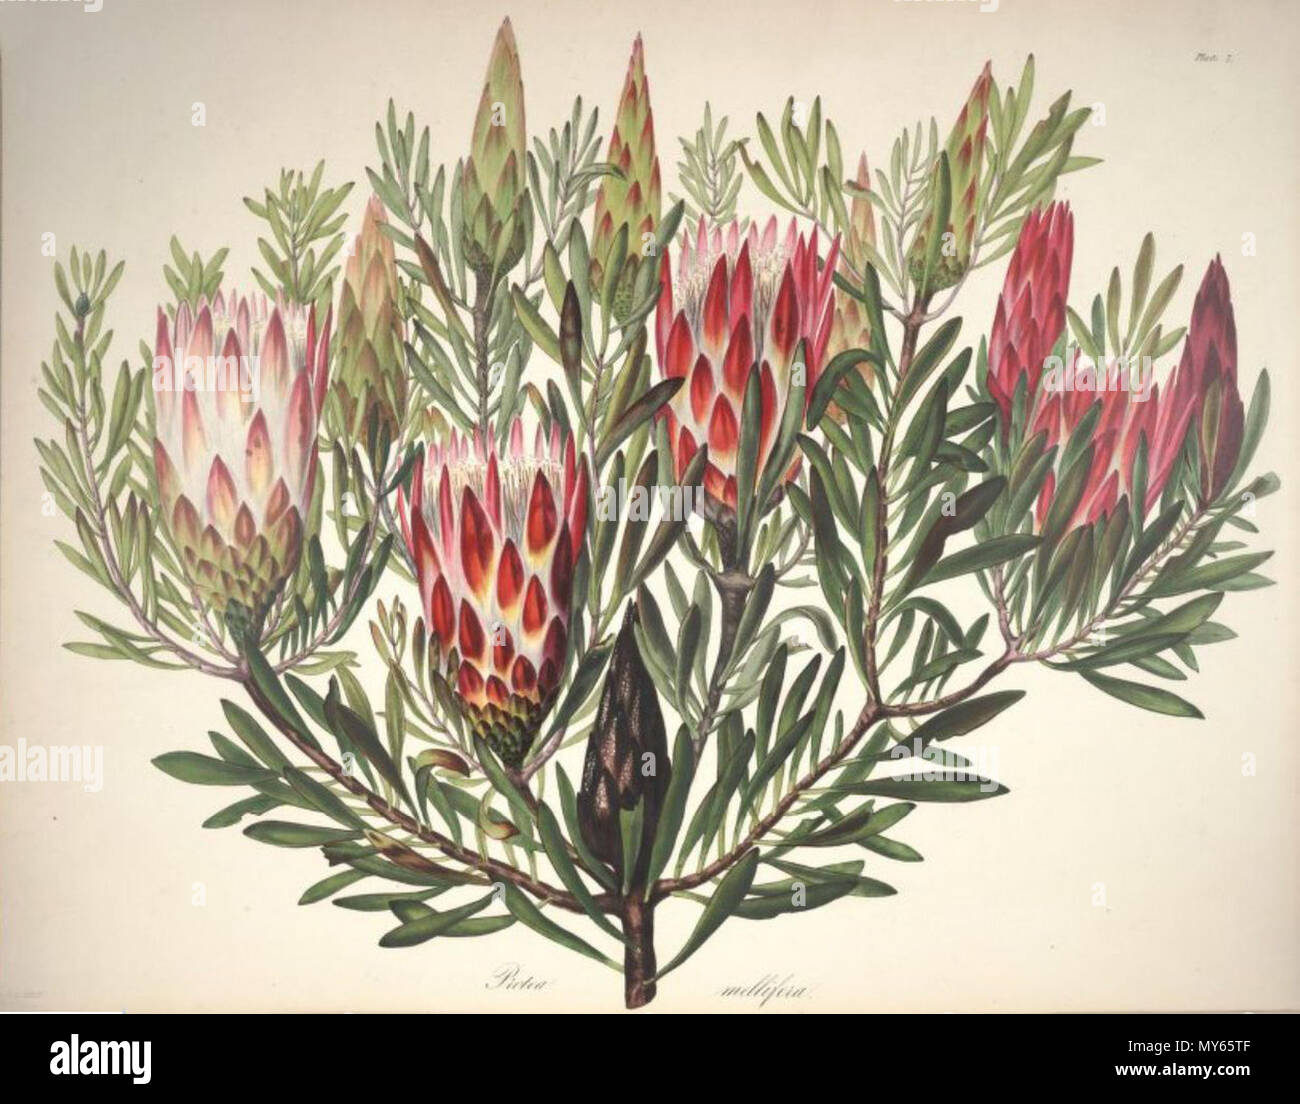 . English: Protea mellifera Thunb. is a synonym of Protea repens L. between 1843 and 1844.   Arabella Elizabeth Roupell  (1817–1914)     Alternative names Roupell; Arabella Roupell; Arabella Elizabeth Pigott  Description British-South African botanical illustrator, painter and botanist  Date of birth/death 23 March 1817 31 July 1914  Location of birth Newport  Authority control  : Q4783330 VIAF: 15525826 Botanist: Roupell GND: 116664444 47 Arabella Elizabeth Roupell07 Stock Photo